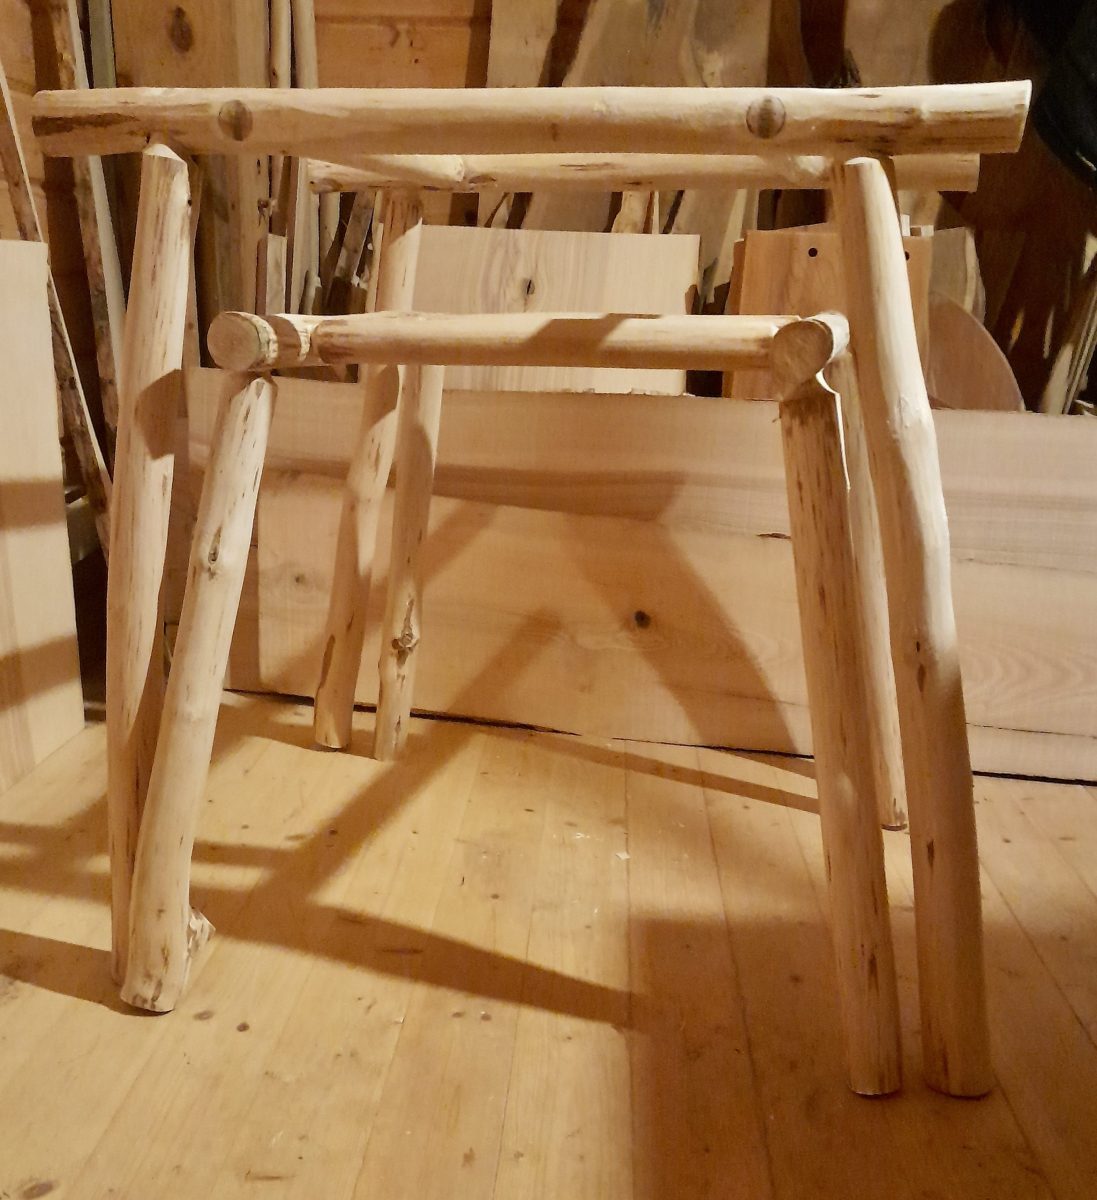 The Brief - Greenwood Hazel and Ash Childs Chairs and Tables - Jason Robards - Hedgerow Crafts